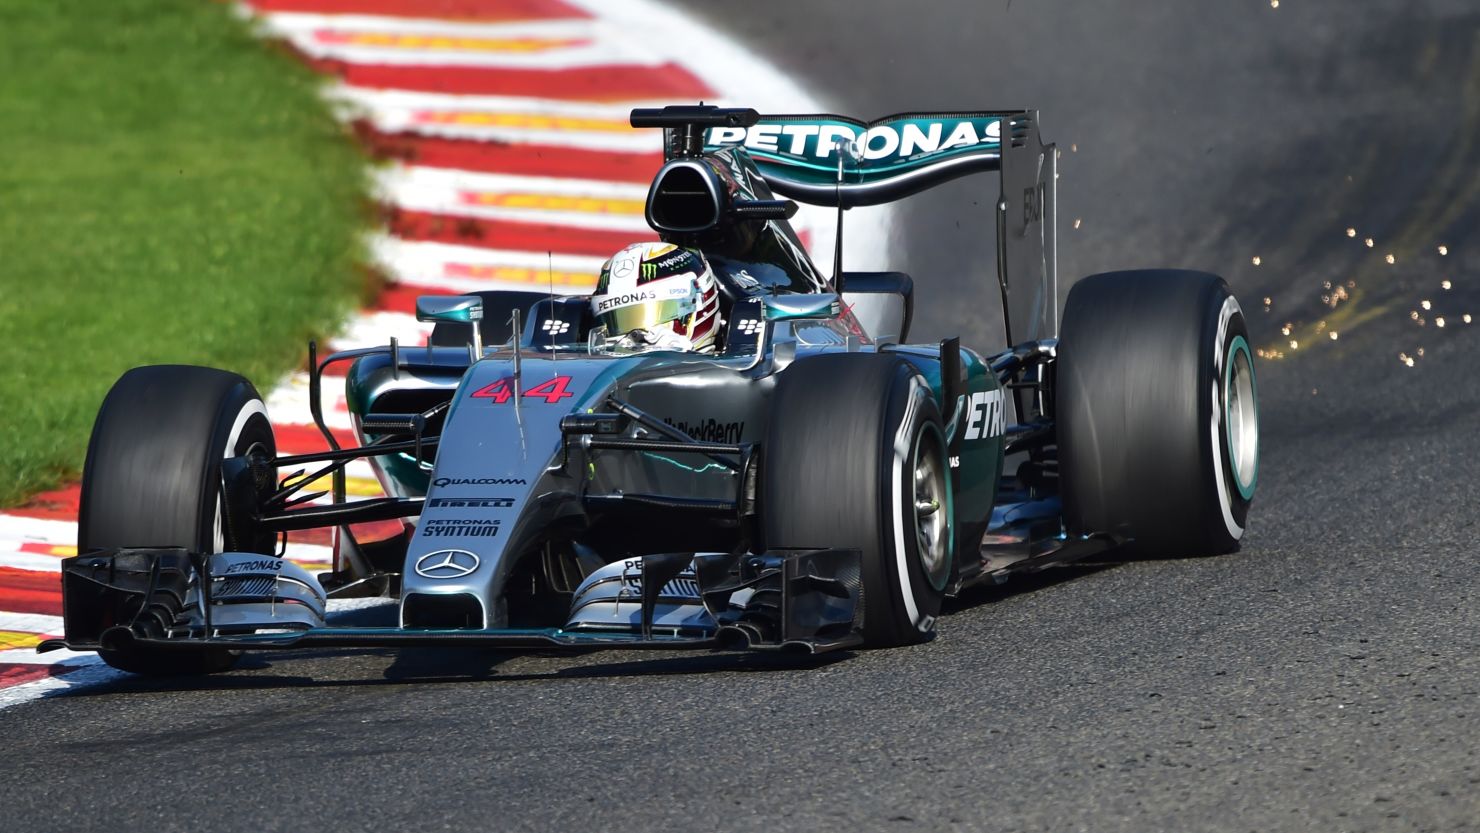 Mercedes' British driver Lewis Hamilton has led qualifying at 10 of 11 race weekends this season.